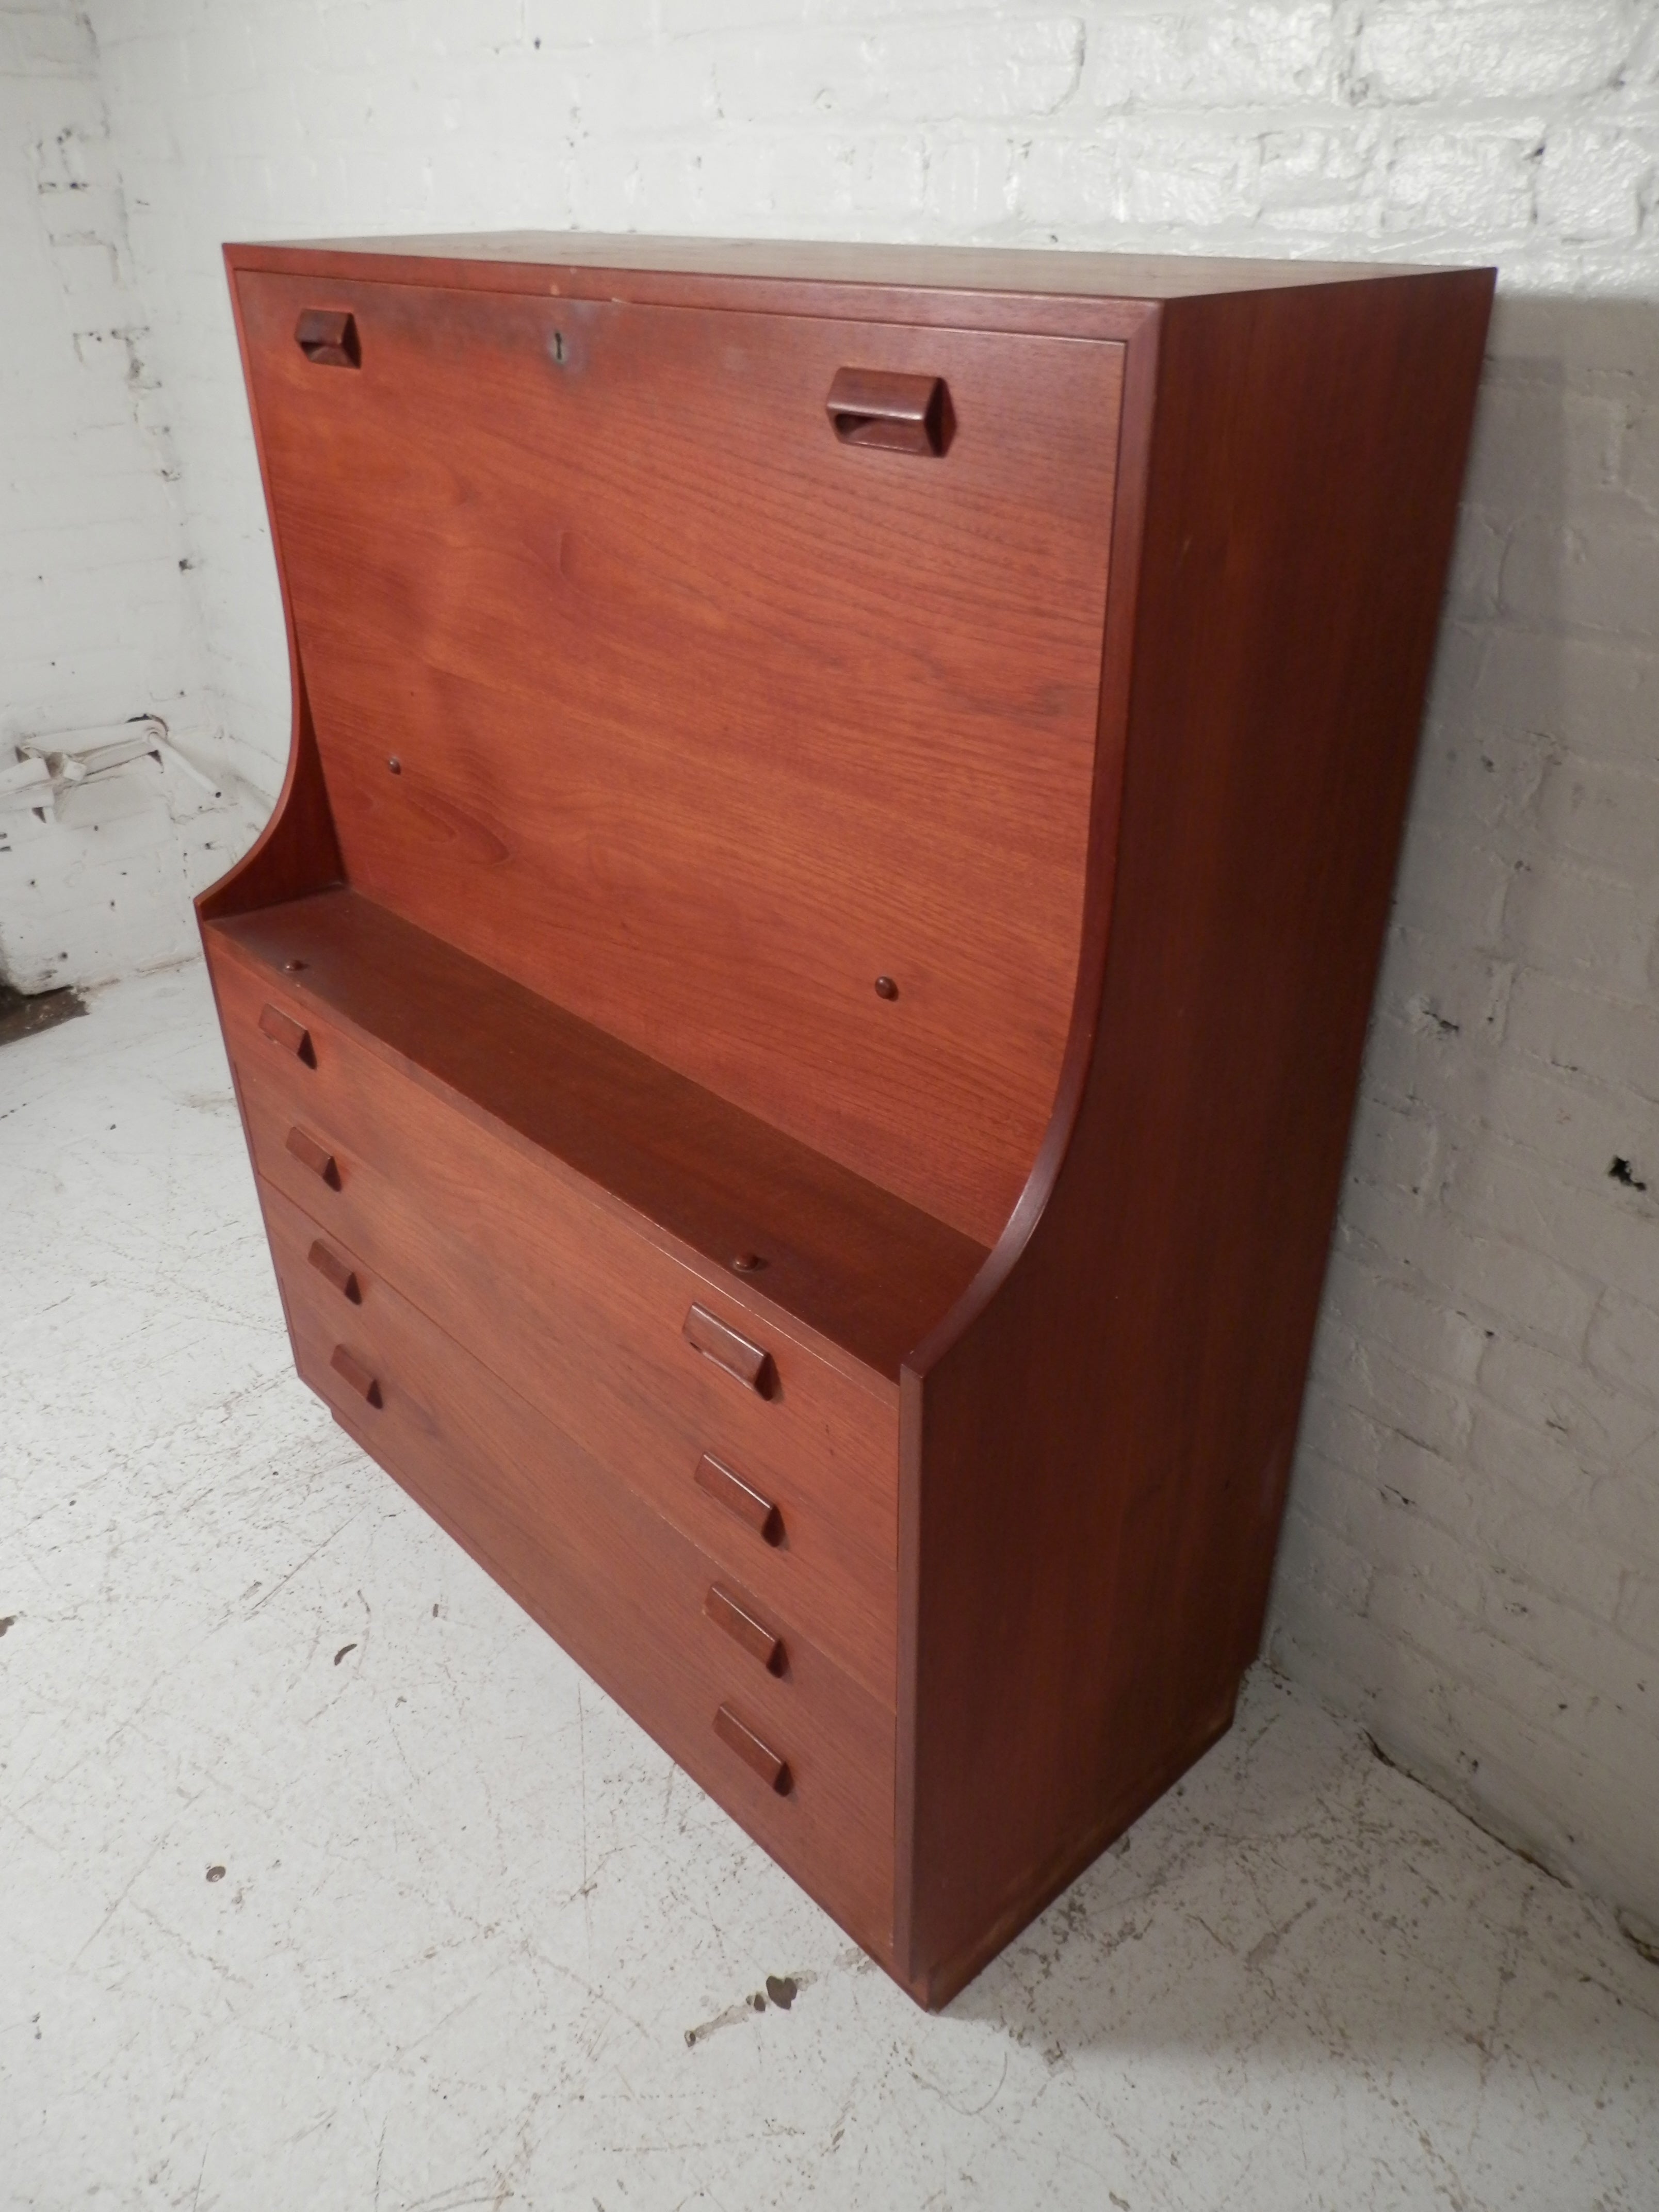 Vintage Danish modern secretary desk. Fold down table with office storage and four dresser drawers. Classic Danish modern design with wood handles and beautiful teak wood grain.